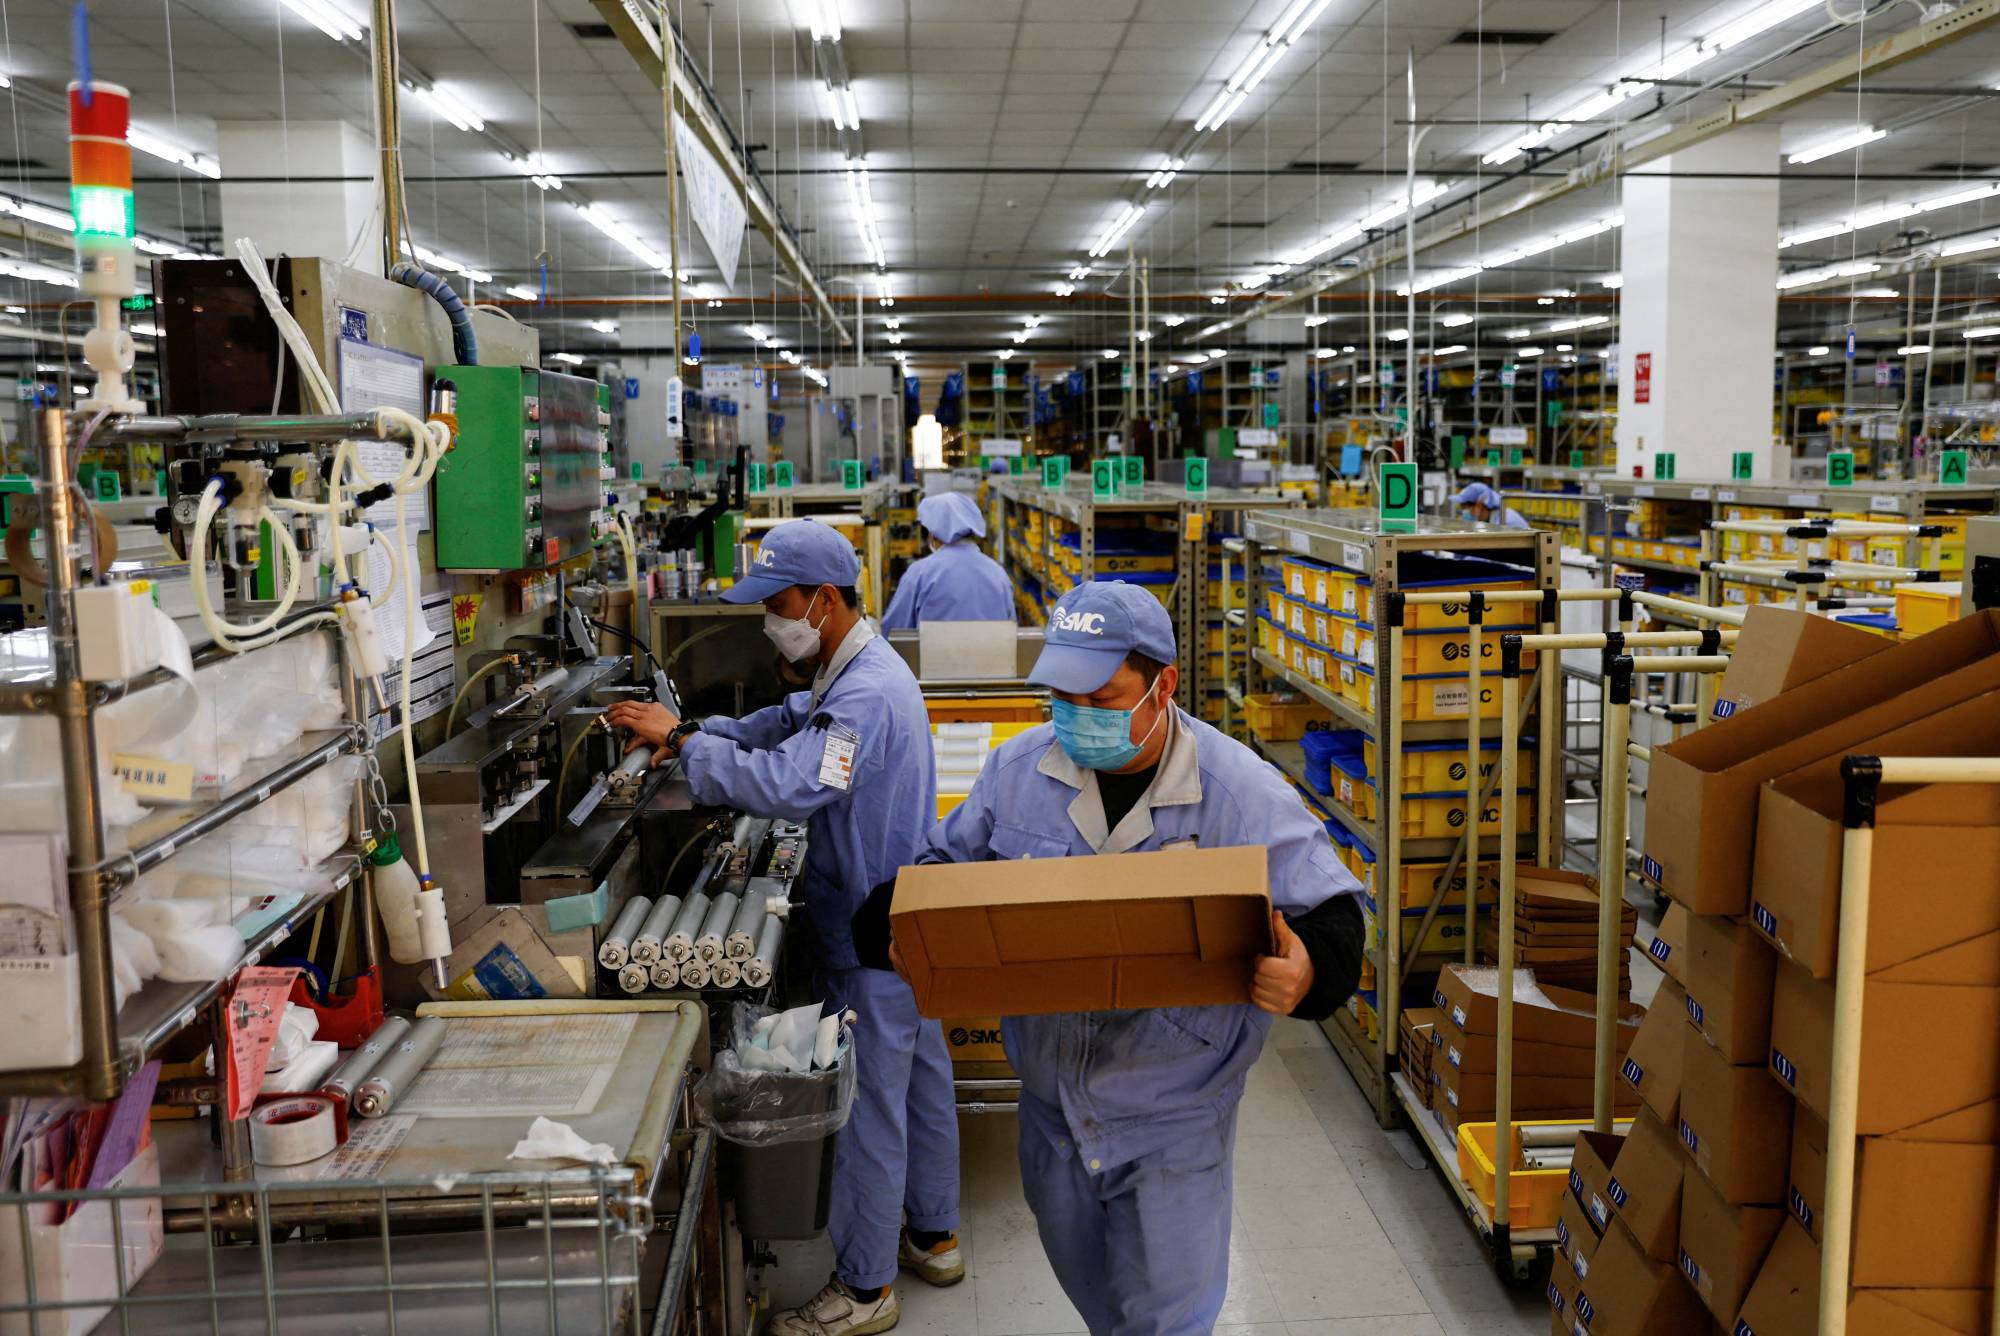 Employees work on a production line manufacturing mechanical parts at an SMC factory in Beijing on Jan. 10. China's efforts to ensure its own economic security have come under scrutiny by other global players. | REUTERS